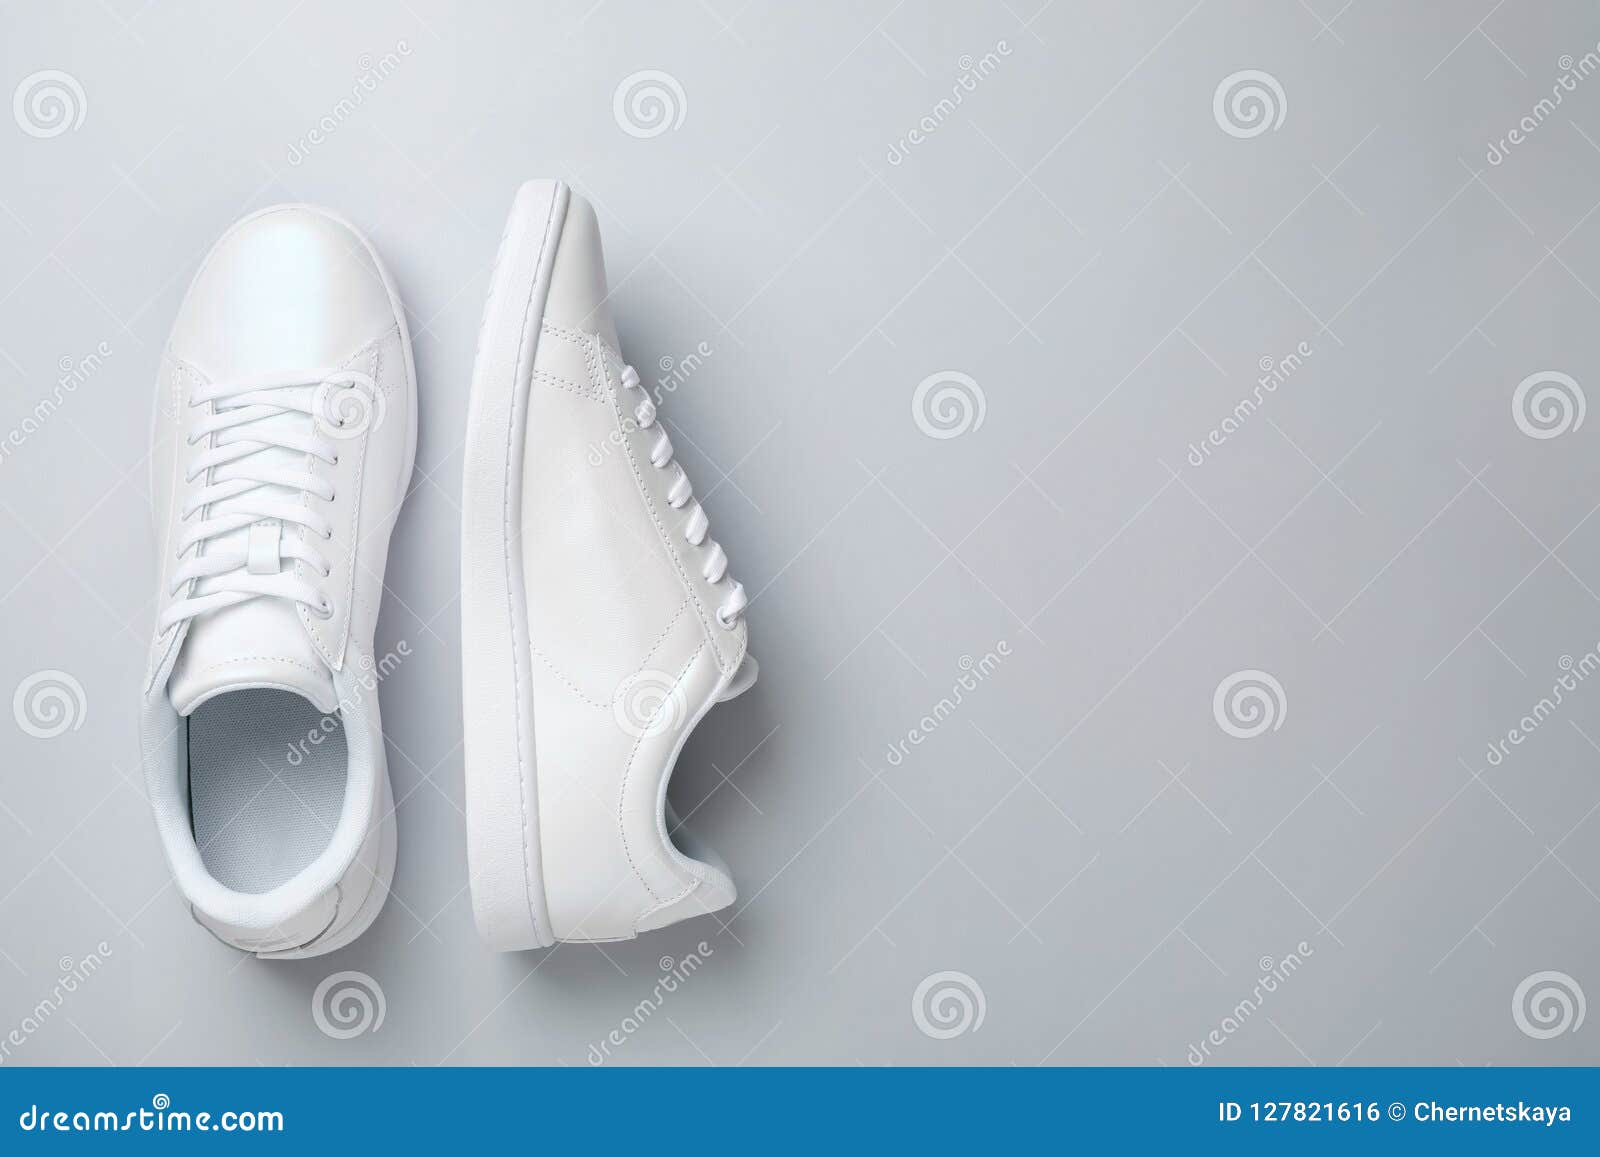 Pair of Trendy Sneakers on Light Background, Flat Lay Stock Photo ...